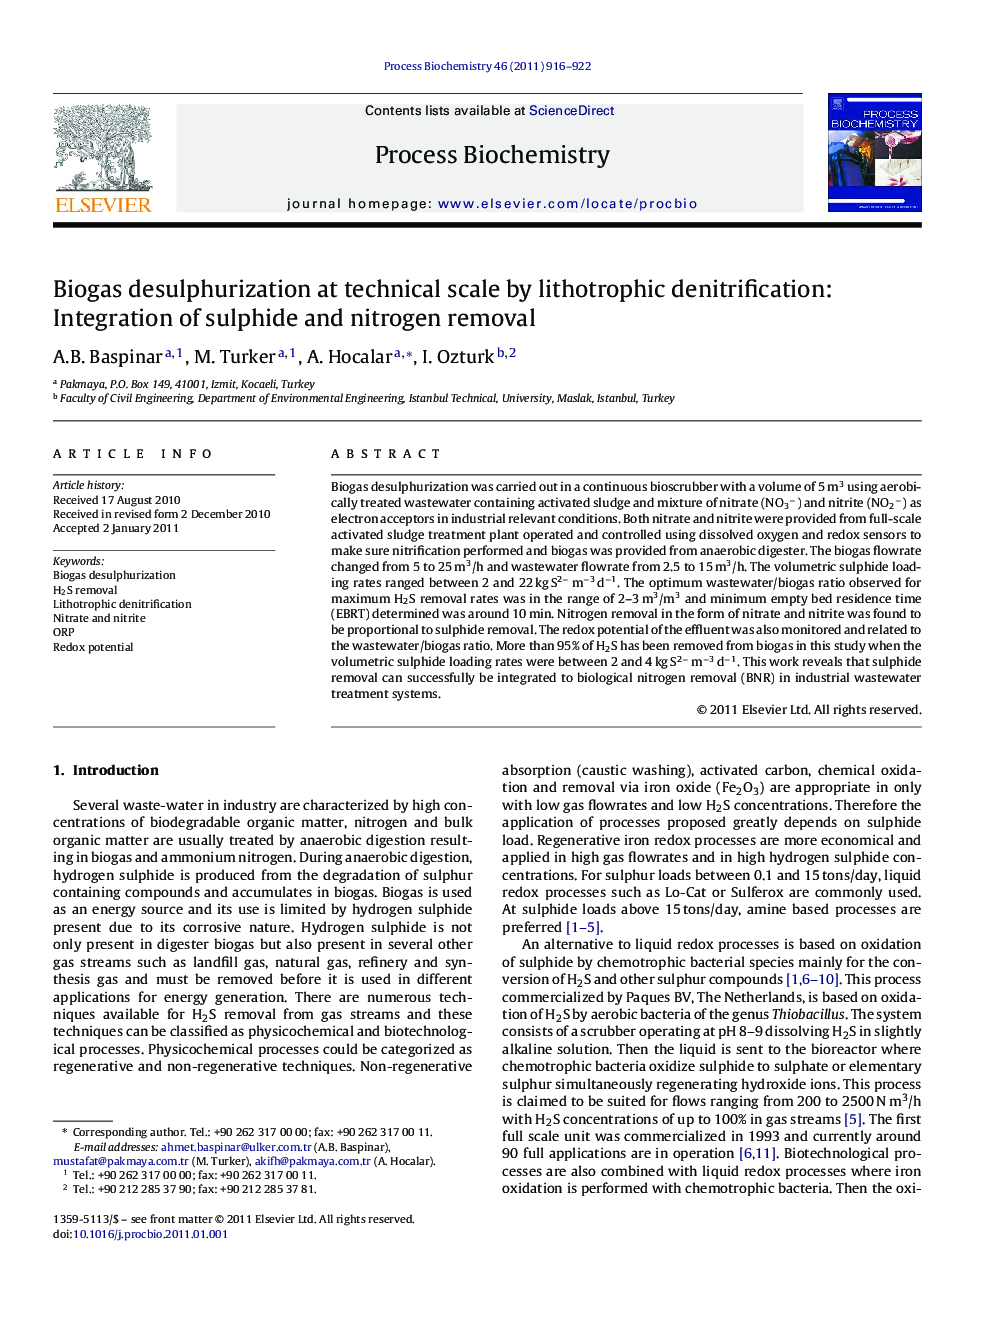 Biogas desulphurization at technical scale by lithotrophic denitrification: Integration of sulphide and nitrogen removal